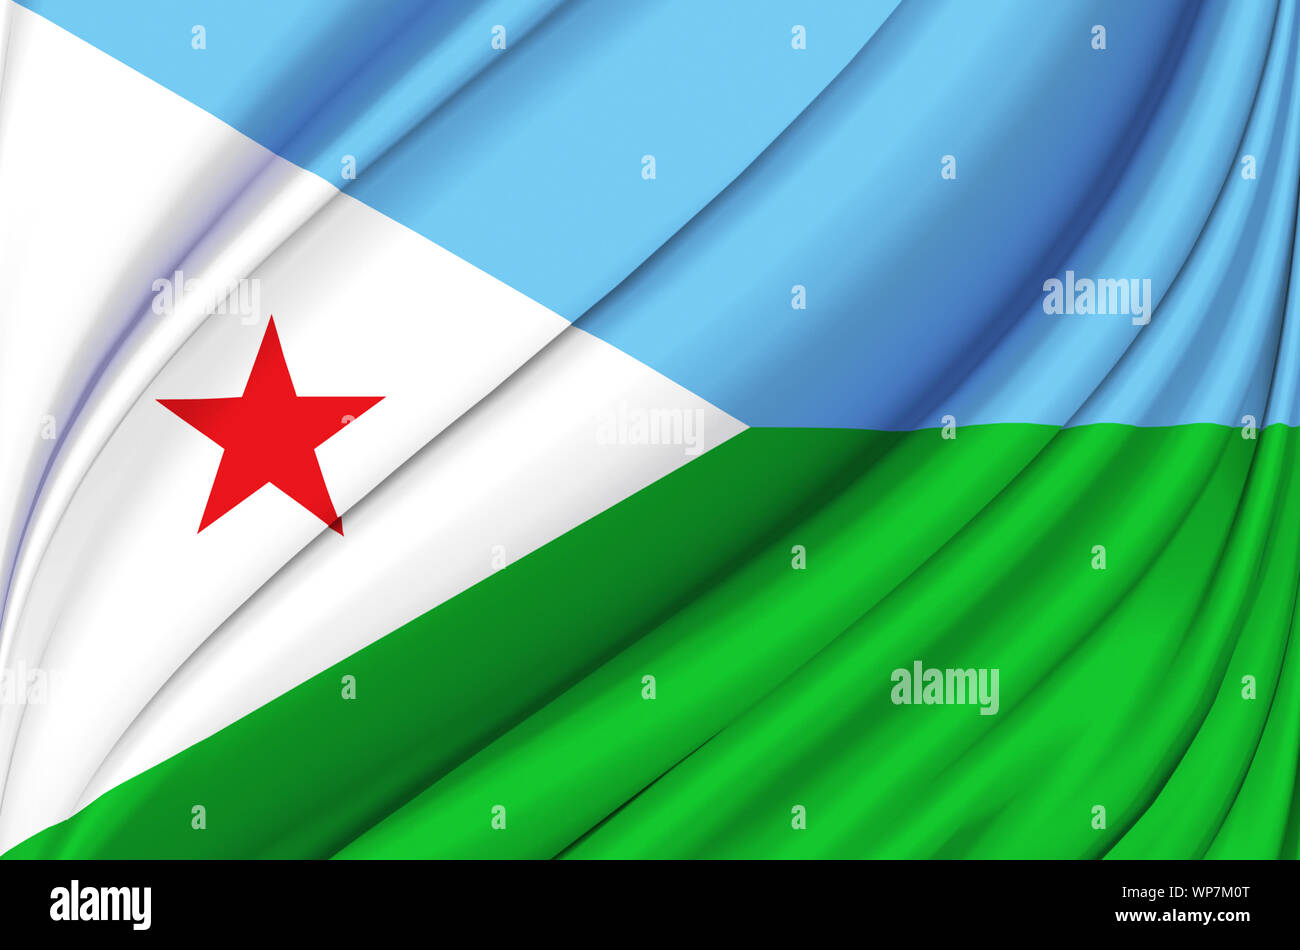 Djibouti waving flag illustration. Countries of Africa. Perfect for background and texture usage. Stock Photo